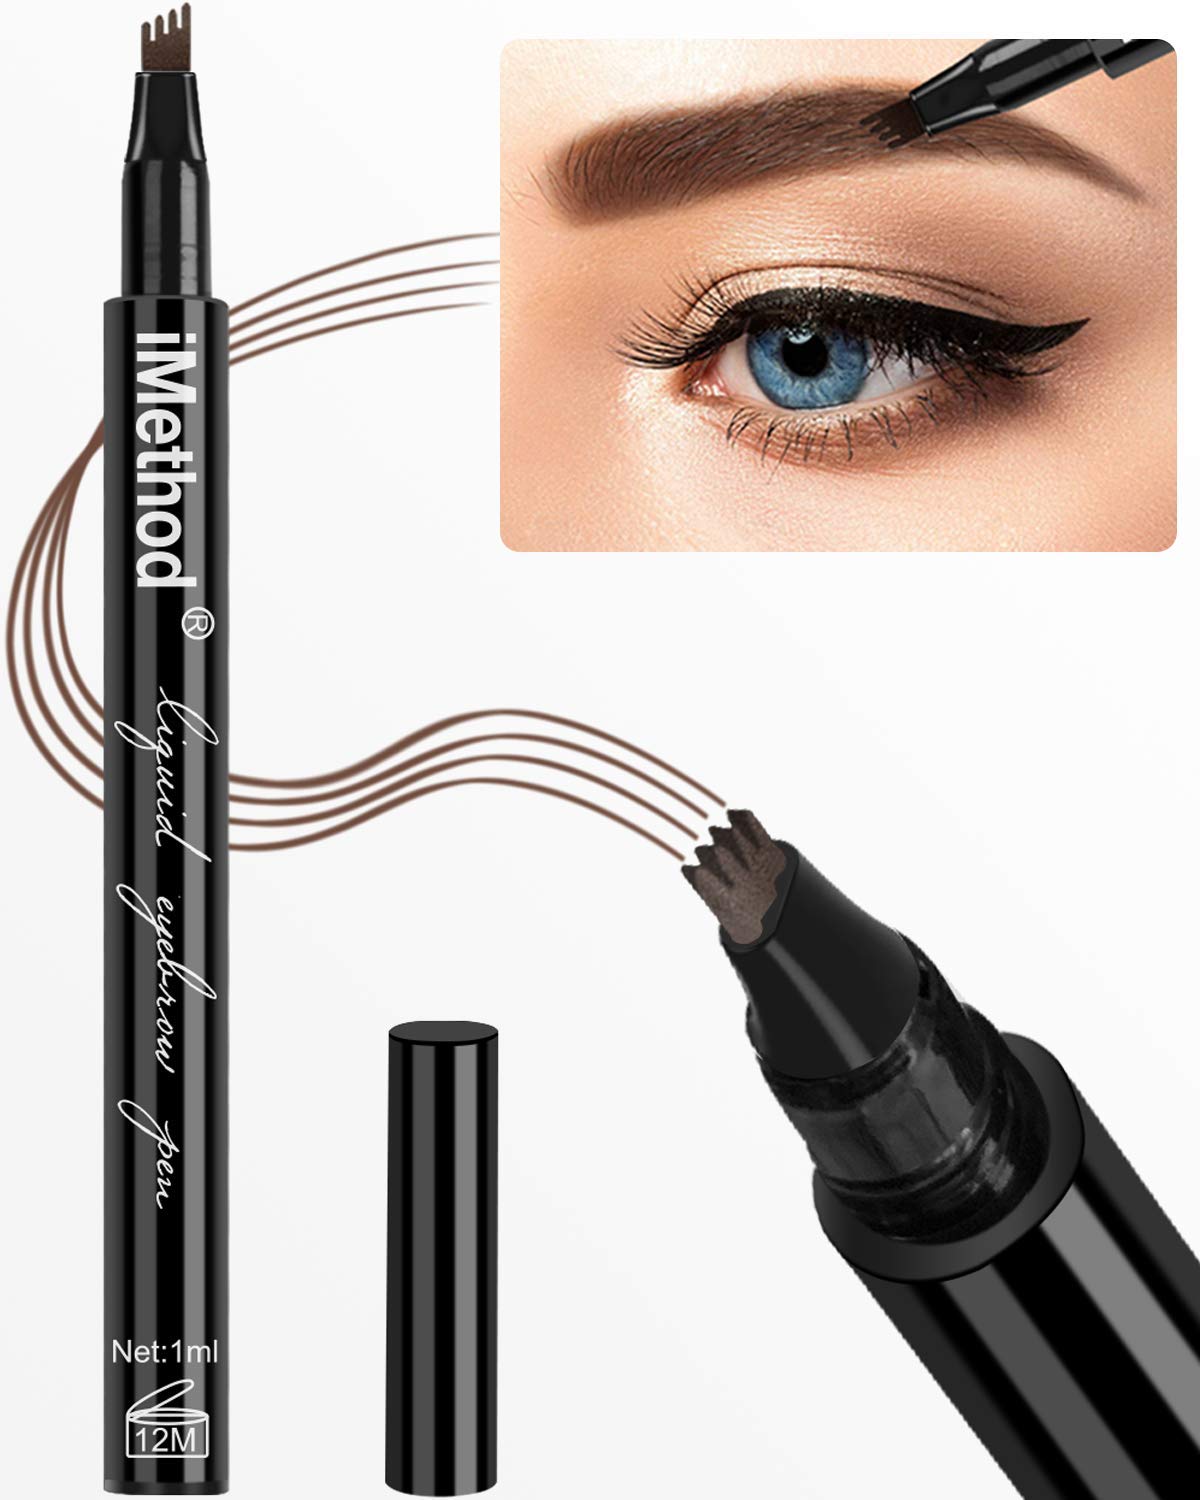 Pro Brow 3 Tools You Need For The Perfect Eyebrow! Enstarz